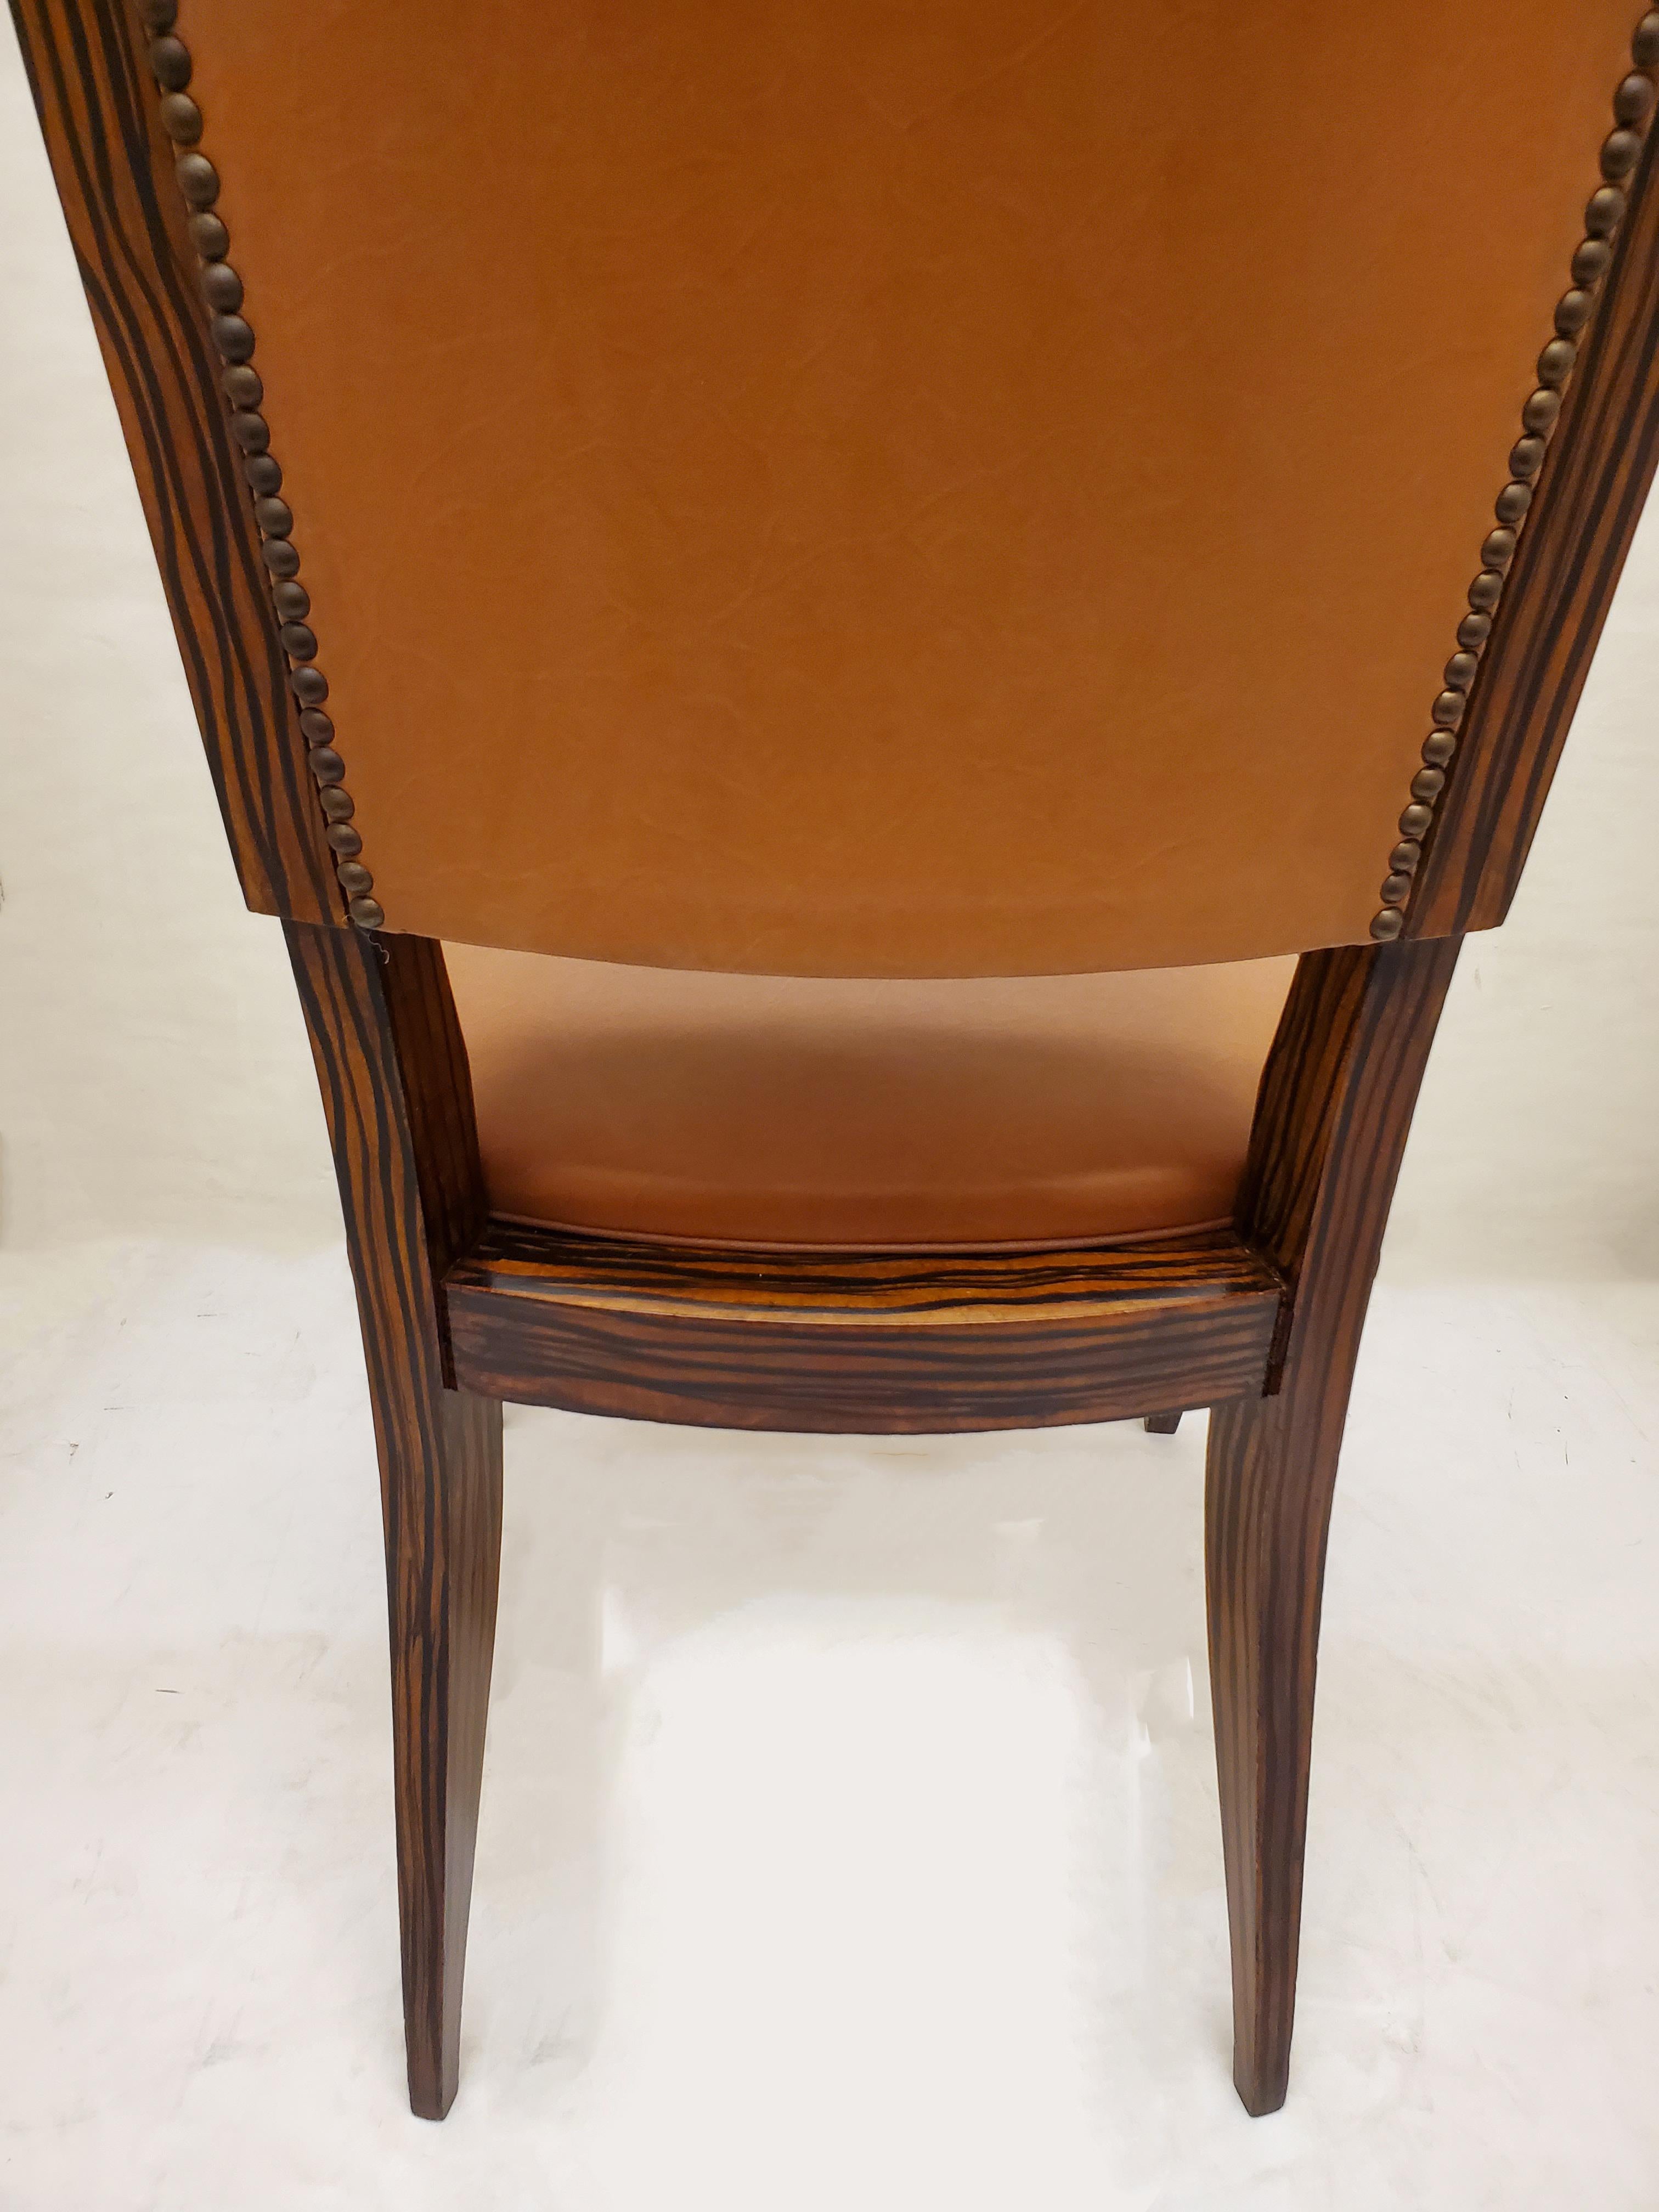 Set of Six Original French Art Deco Faux Macassar Ebony Wood Dining Chairs For Sale 2